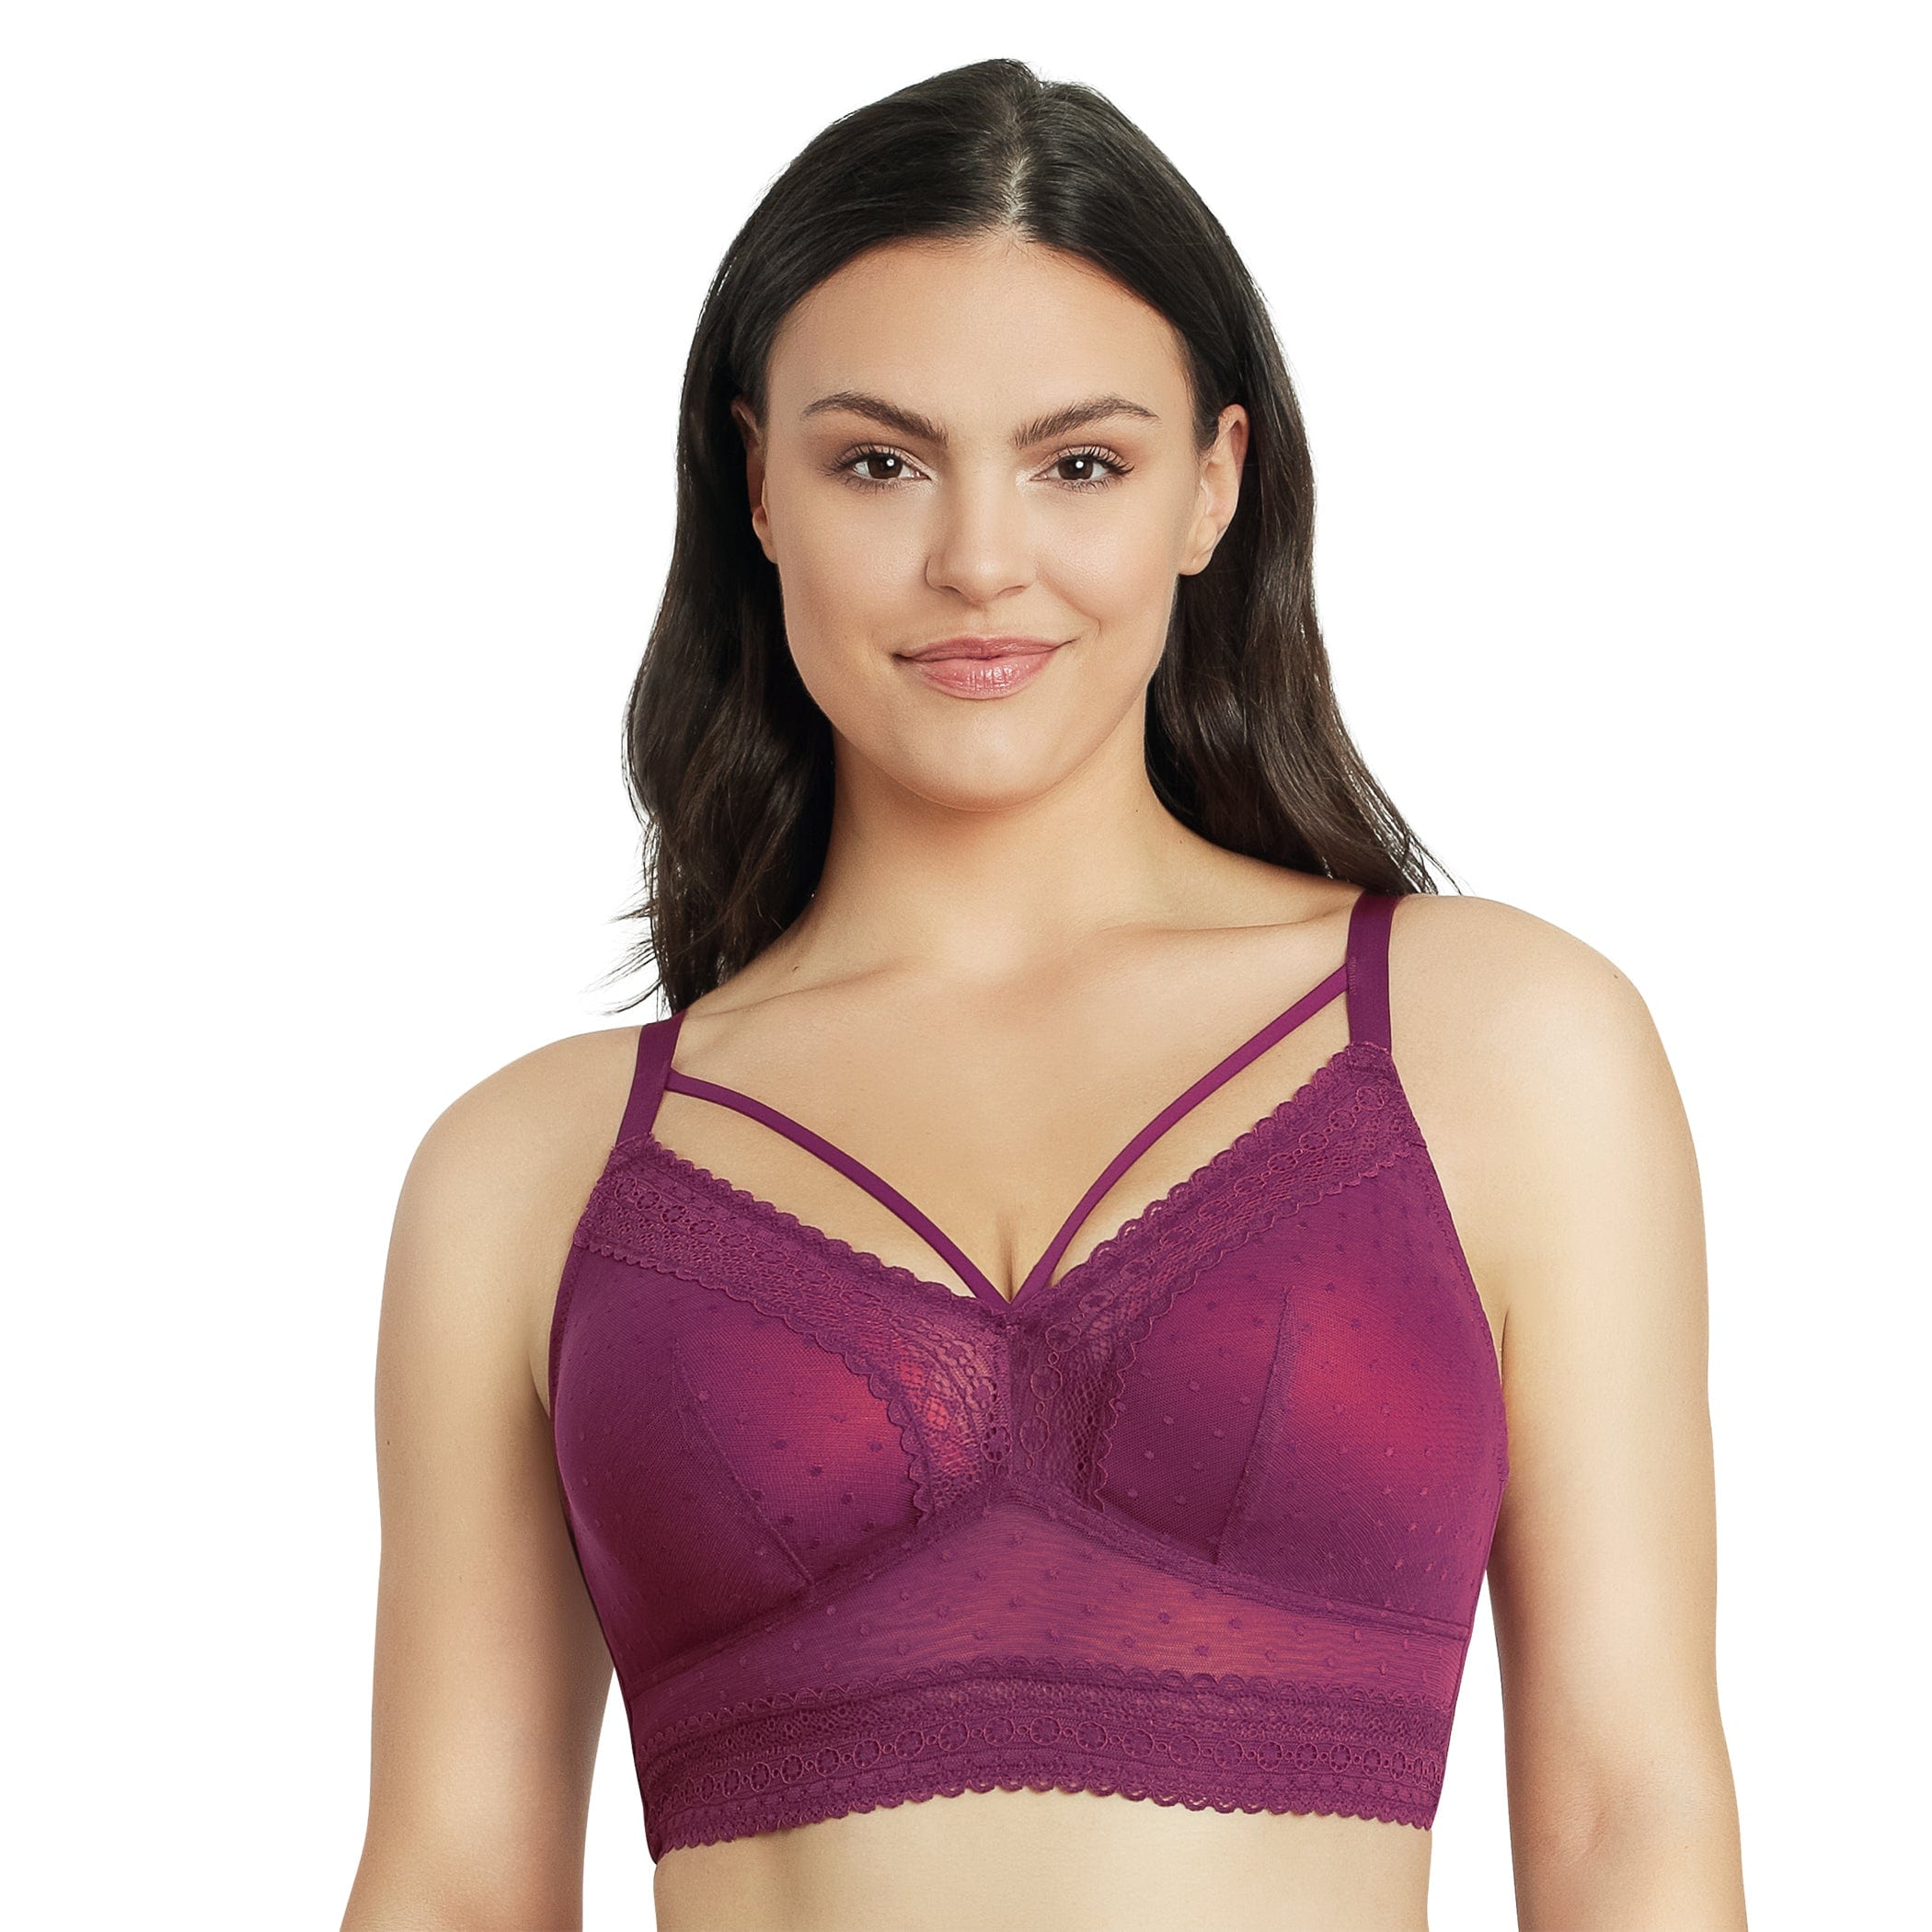 Which Part Of The Bra Provides The Most Support? - ParfaitLingerie.com -  Blog